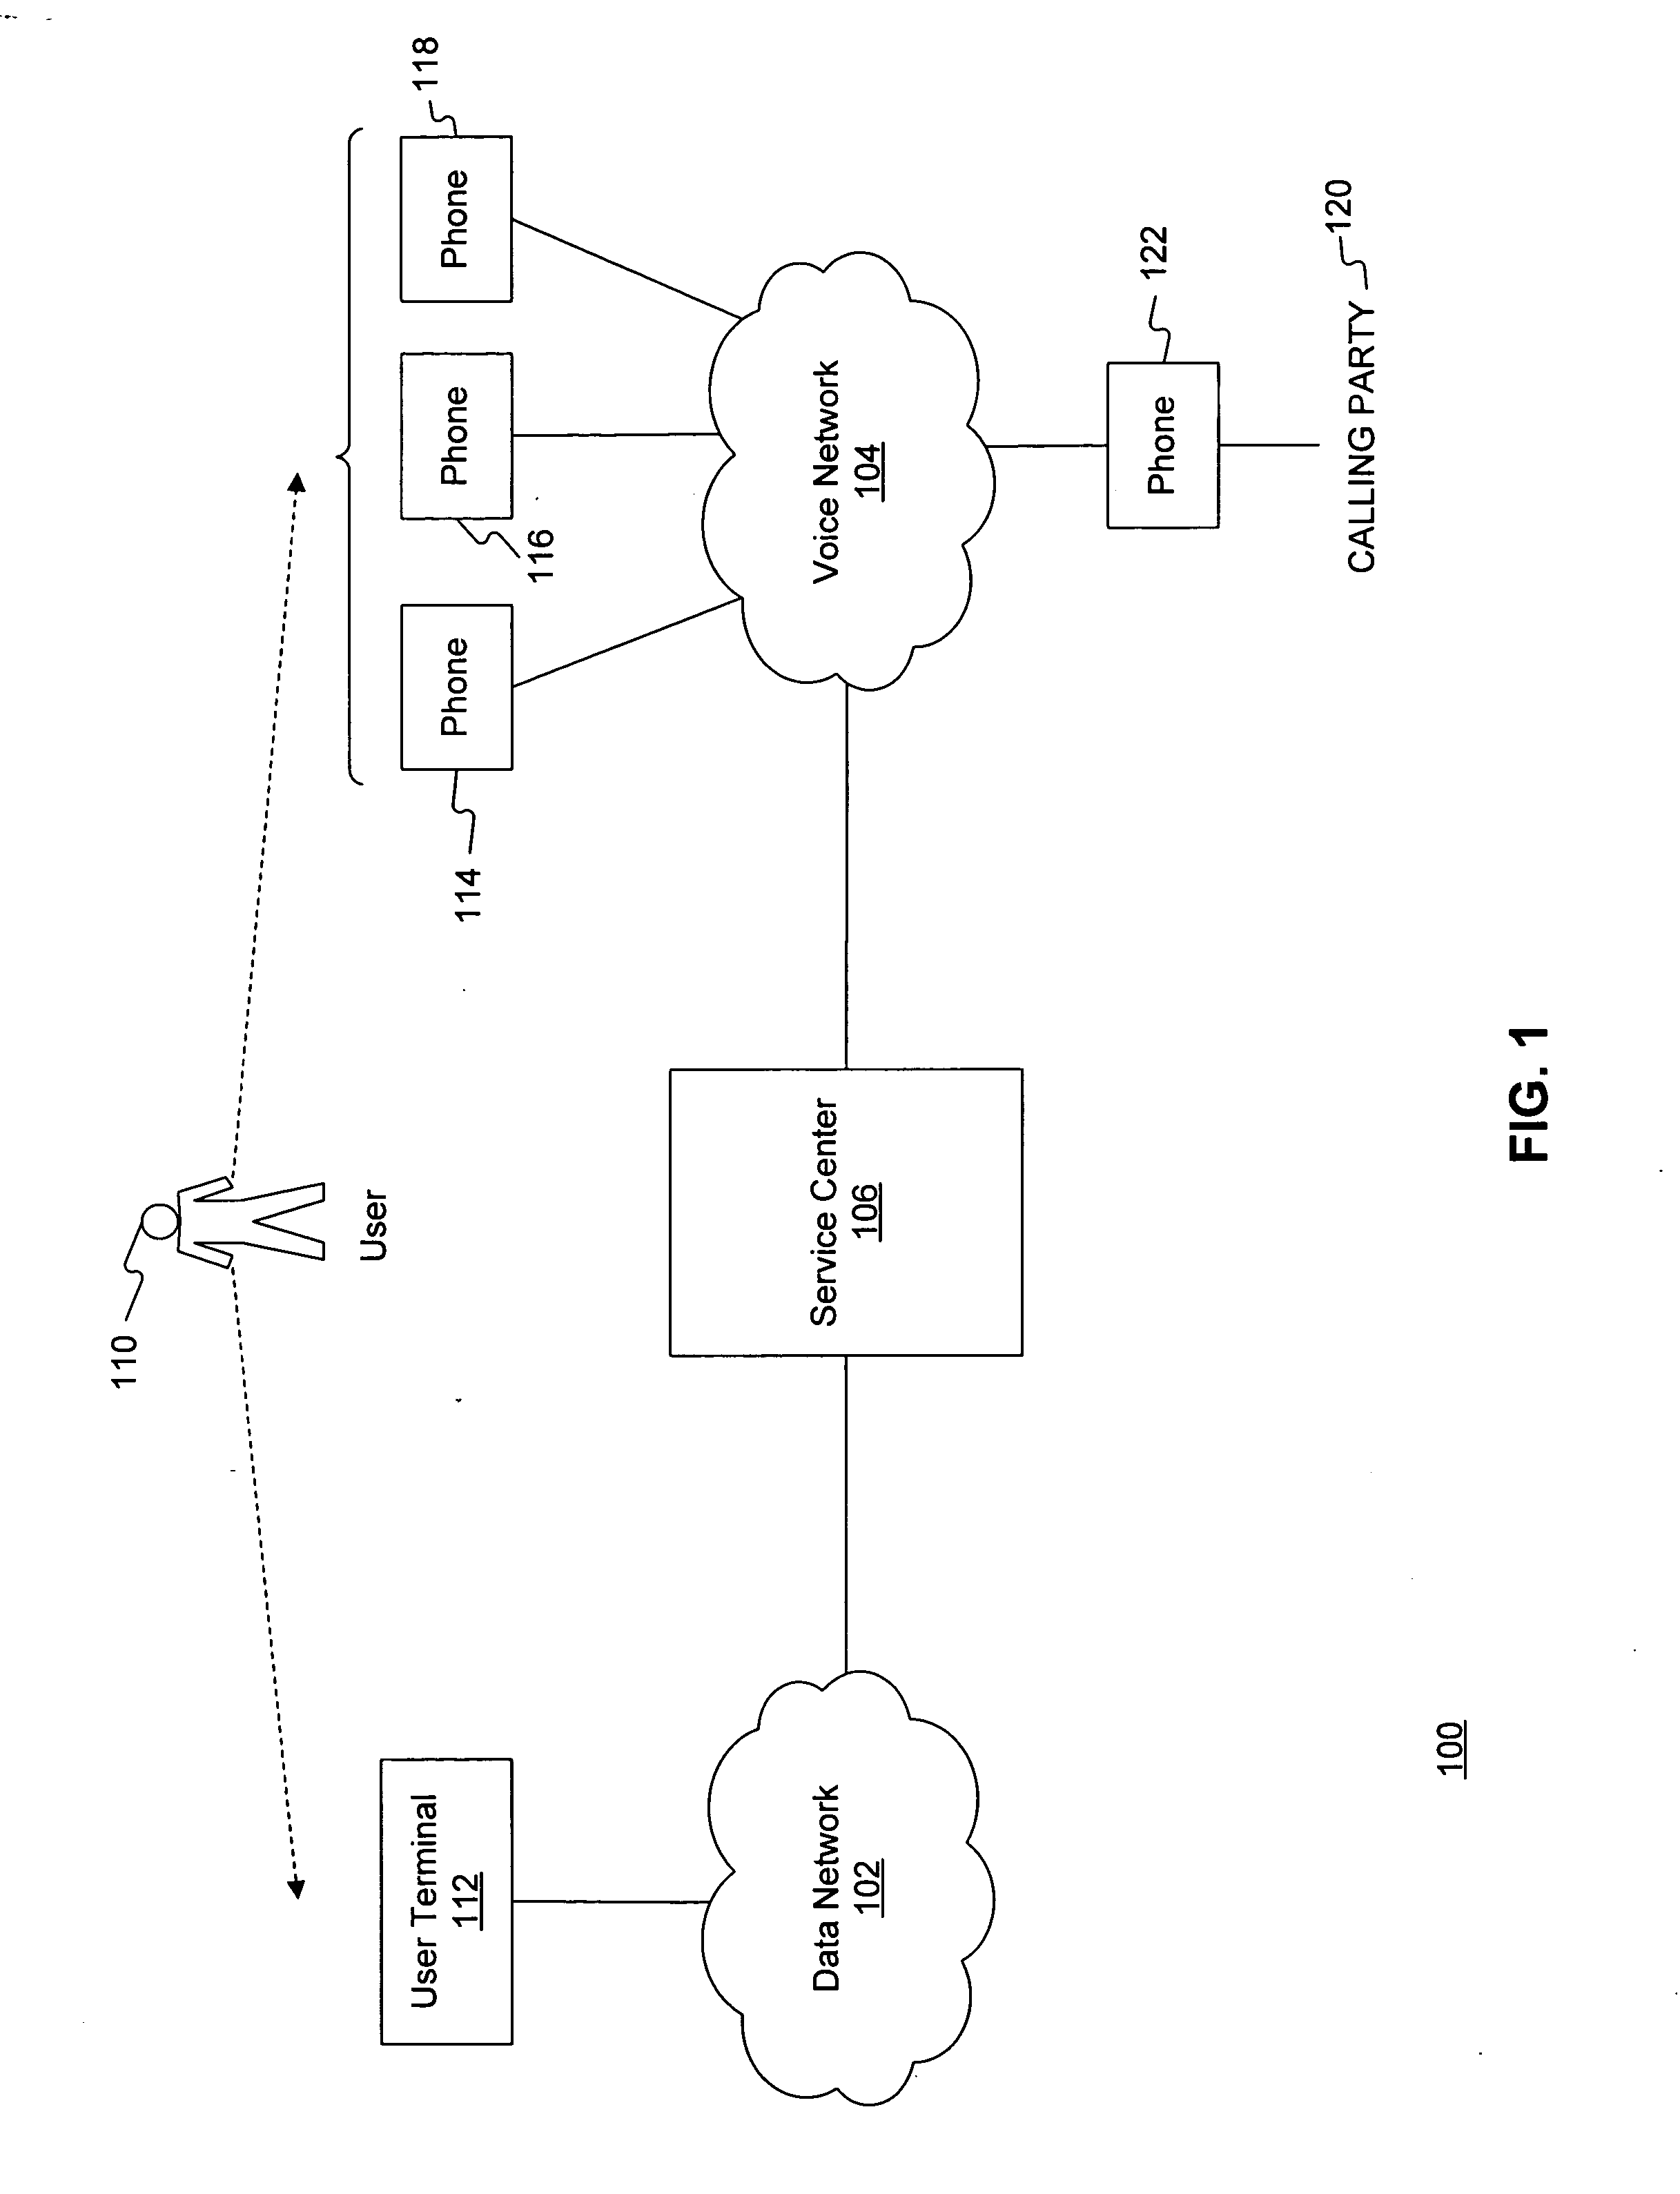 Methods and systems for preemptive rejection of calls